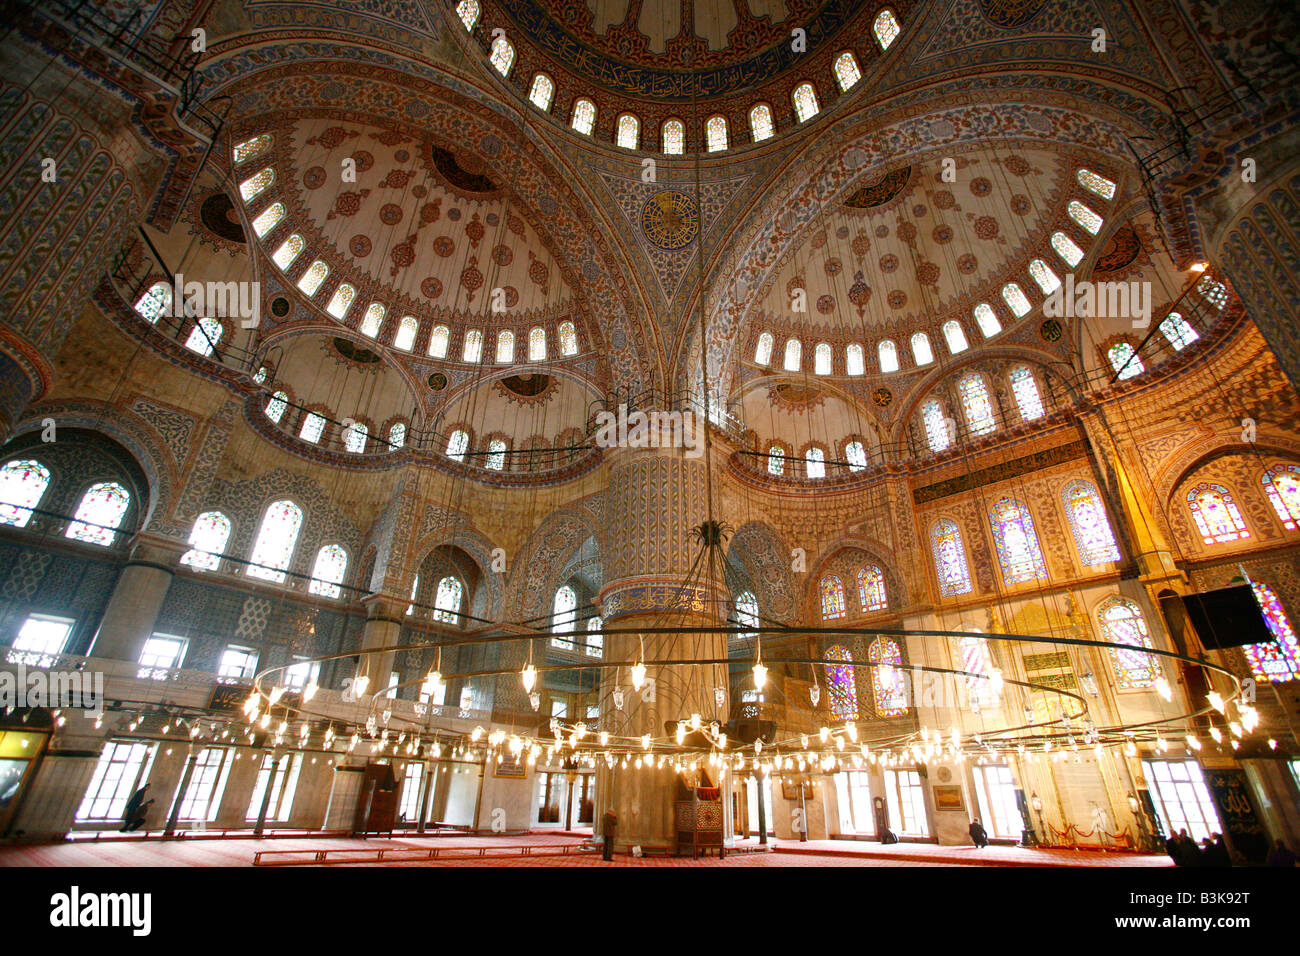 May 2008 - The interior of the Blue Mosque or in its Turkish name Sultan Ahmet Camii Istanbul Turkey Stock Photo